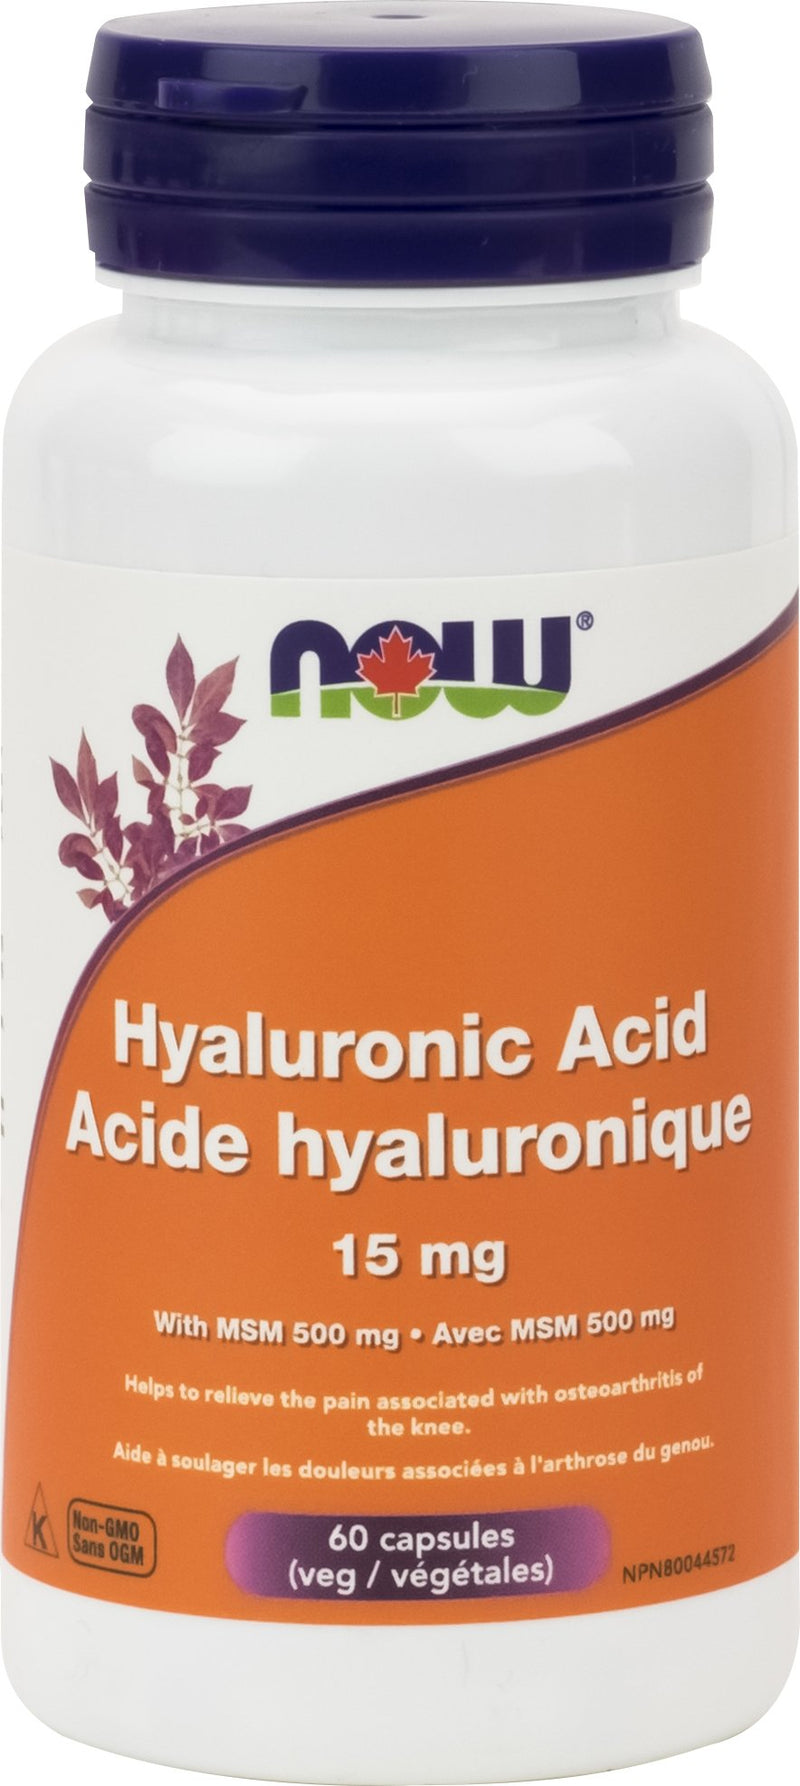 NOW Hyaluronic Acid 15 with MSM 500 mg 60 Capsules Image 1